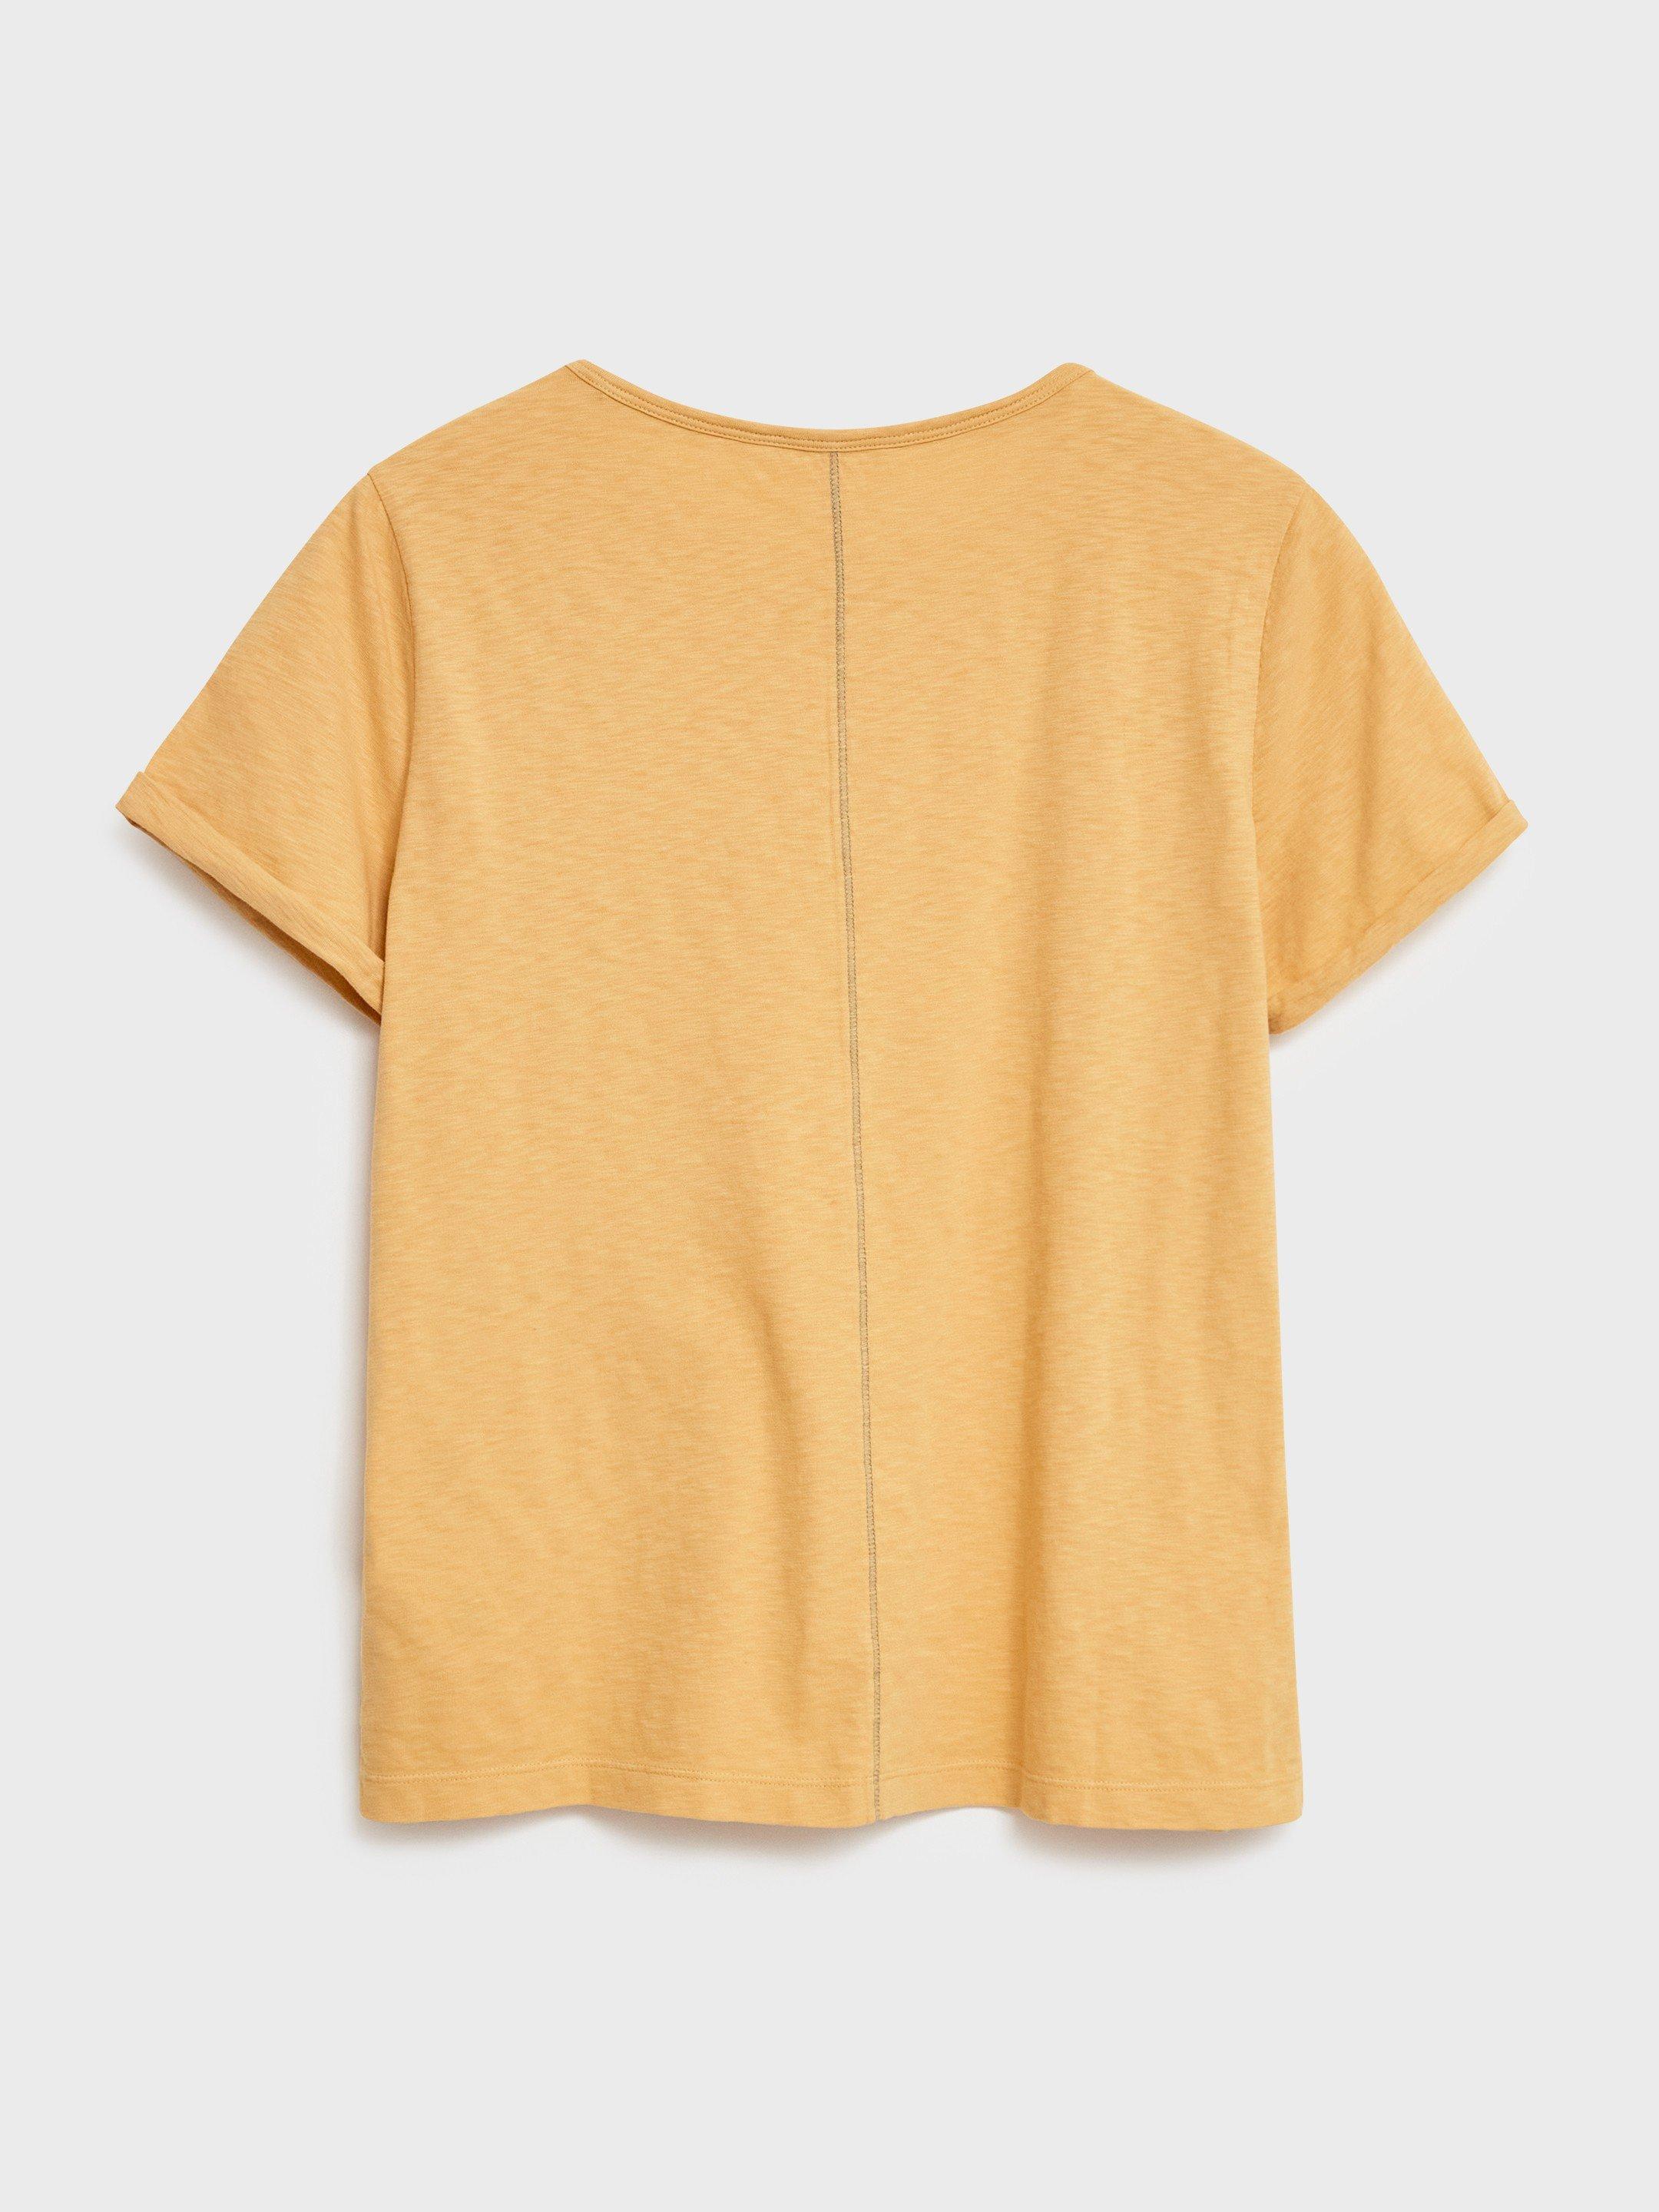 Neo Cotton Tee in MID YELLOW - FLAT BACK